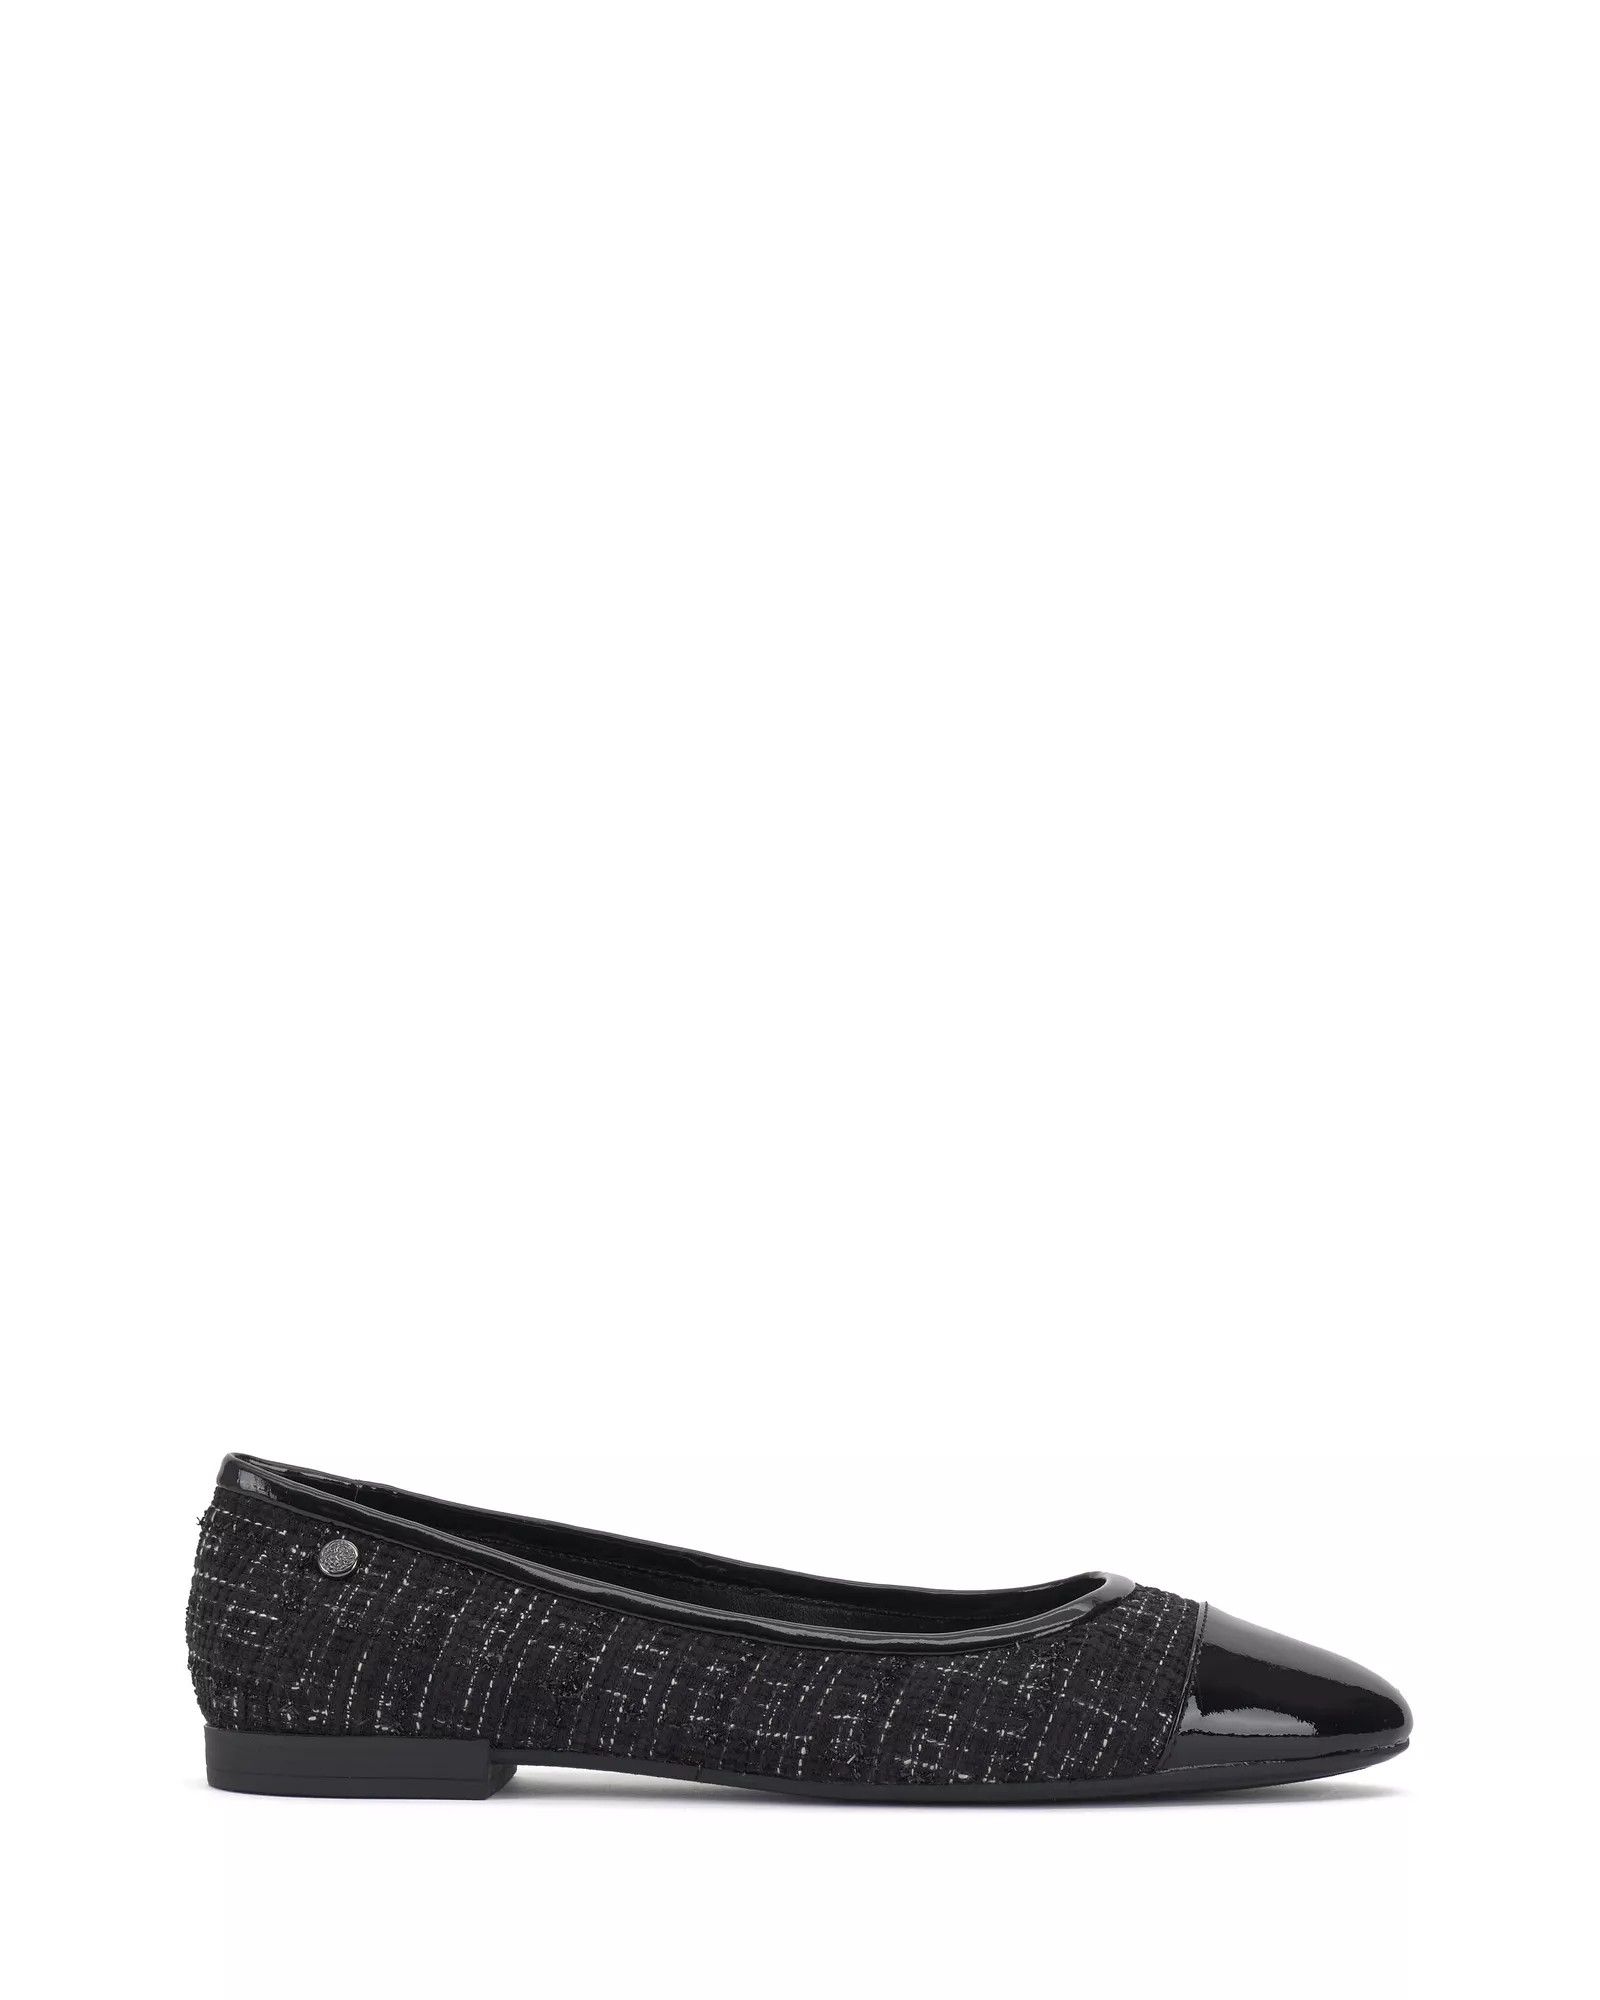 Vince Camuto Minndy Cap Toe Flat | Vince Camuto